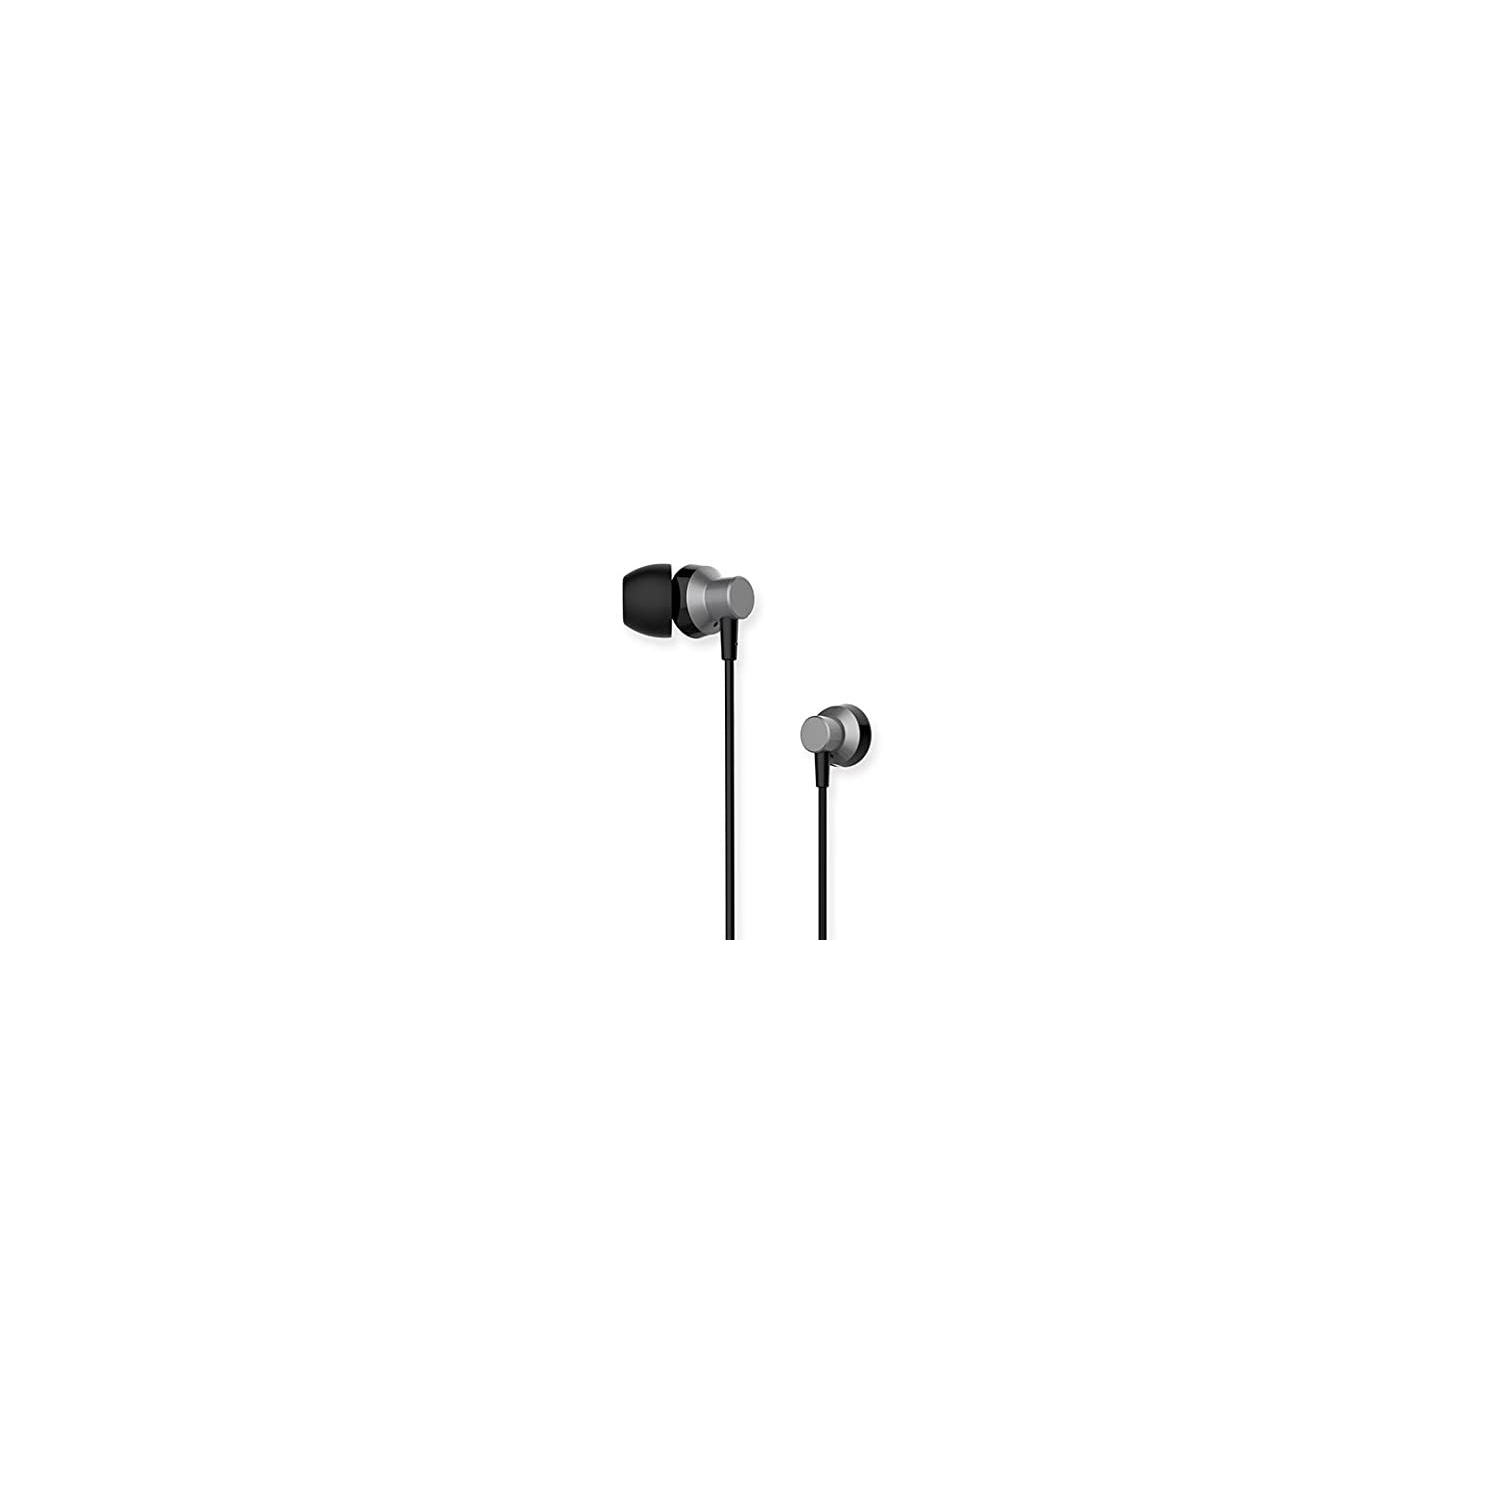 Remax RM-512 3.5mm Wired Music Headset Music Earphone Heavy Bass in-Ear Headphone for iPhone Samsung Xiaomi (Black)